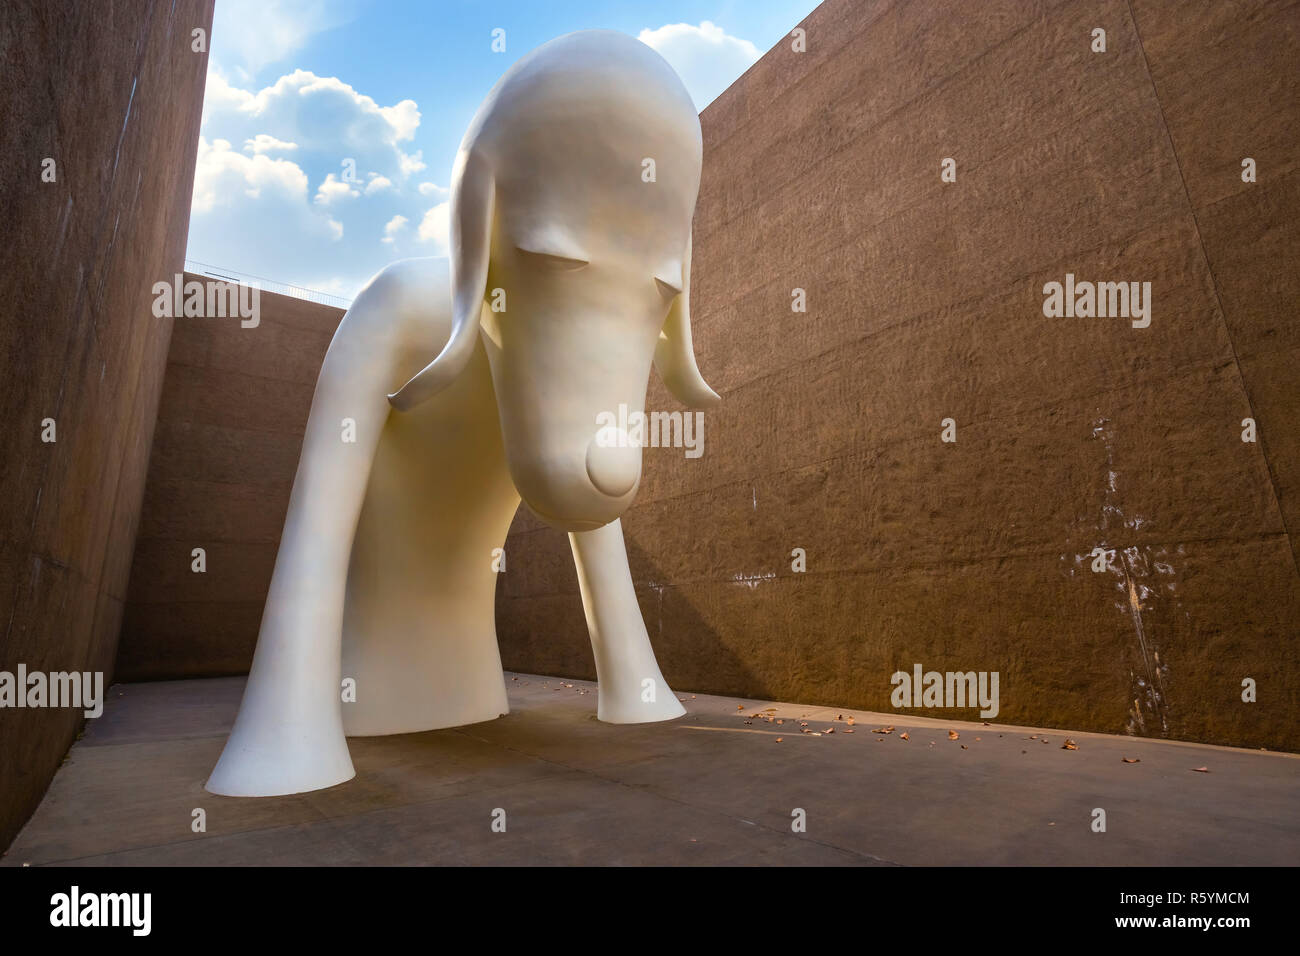 Tokyo, Japan - April 22 2018:  Aomori Dog Statue a gigantic white dog over 8.5 meters tall at The Aomori Museum Stock Photo